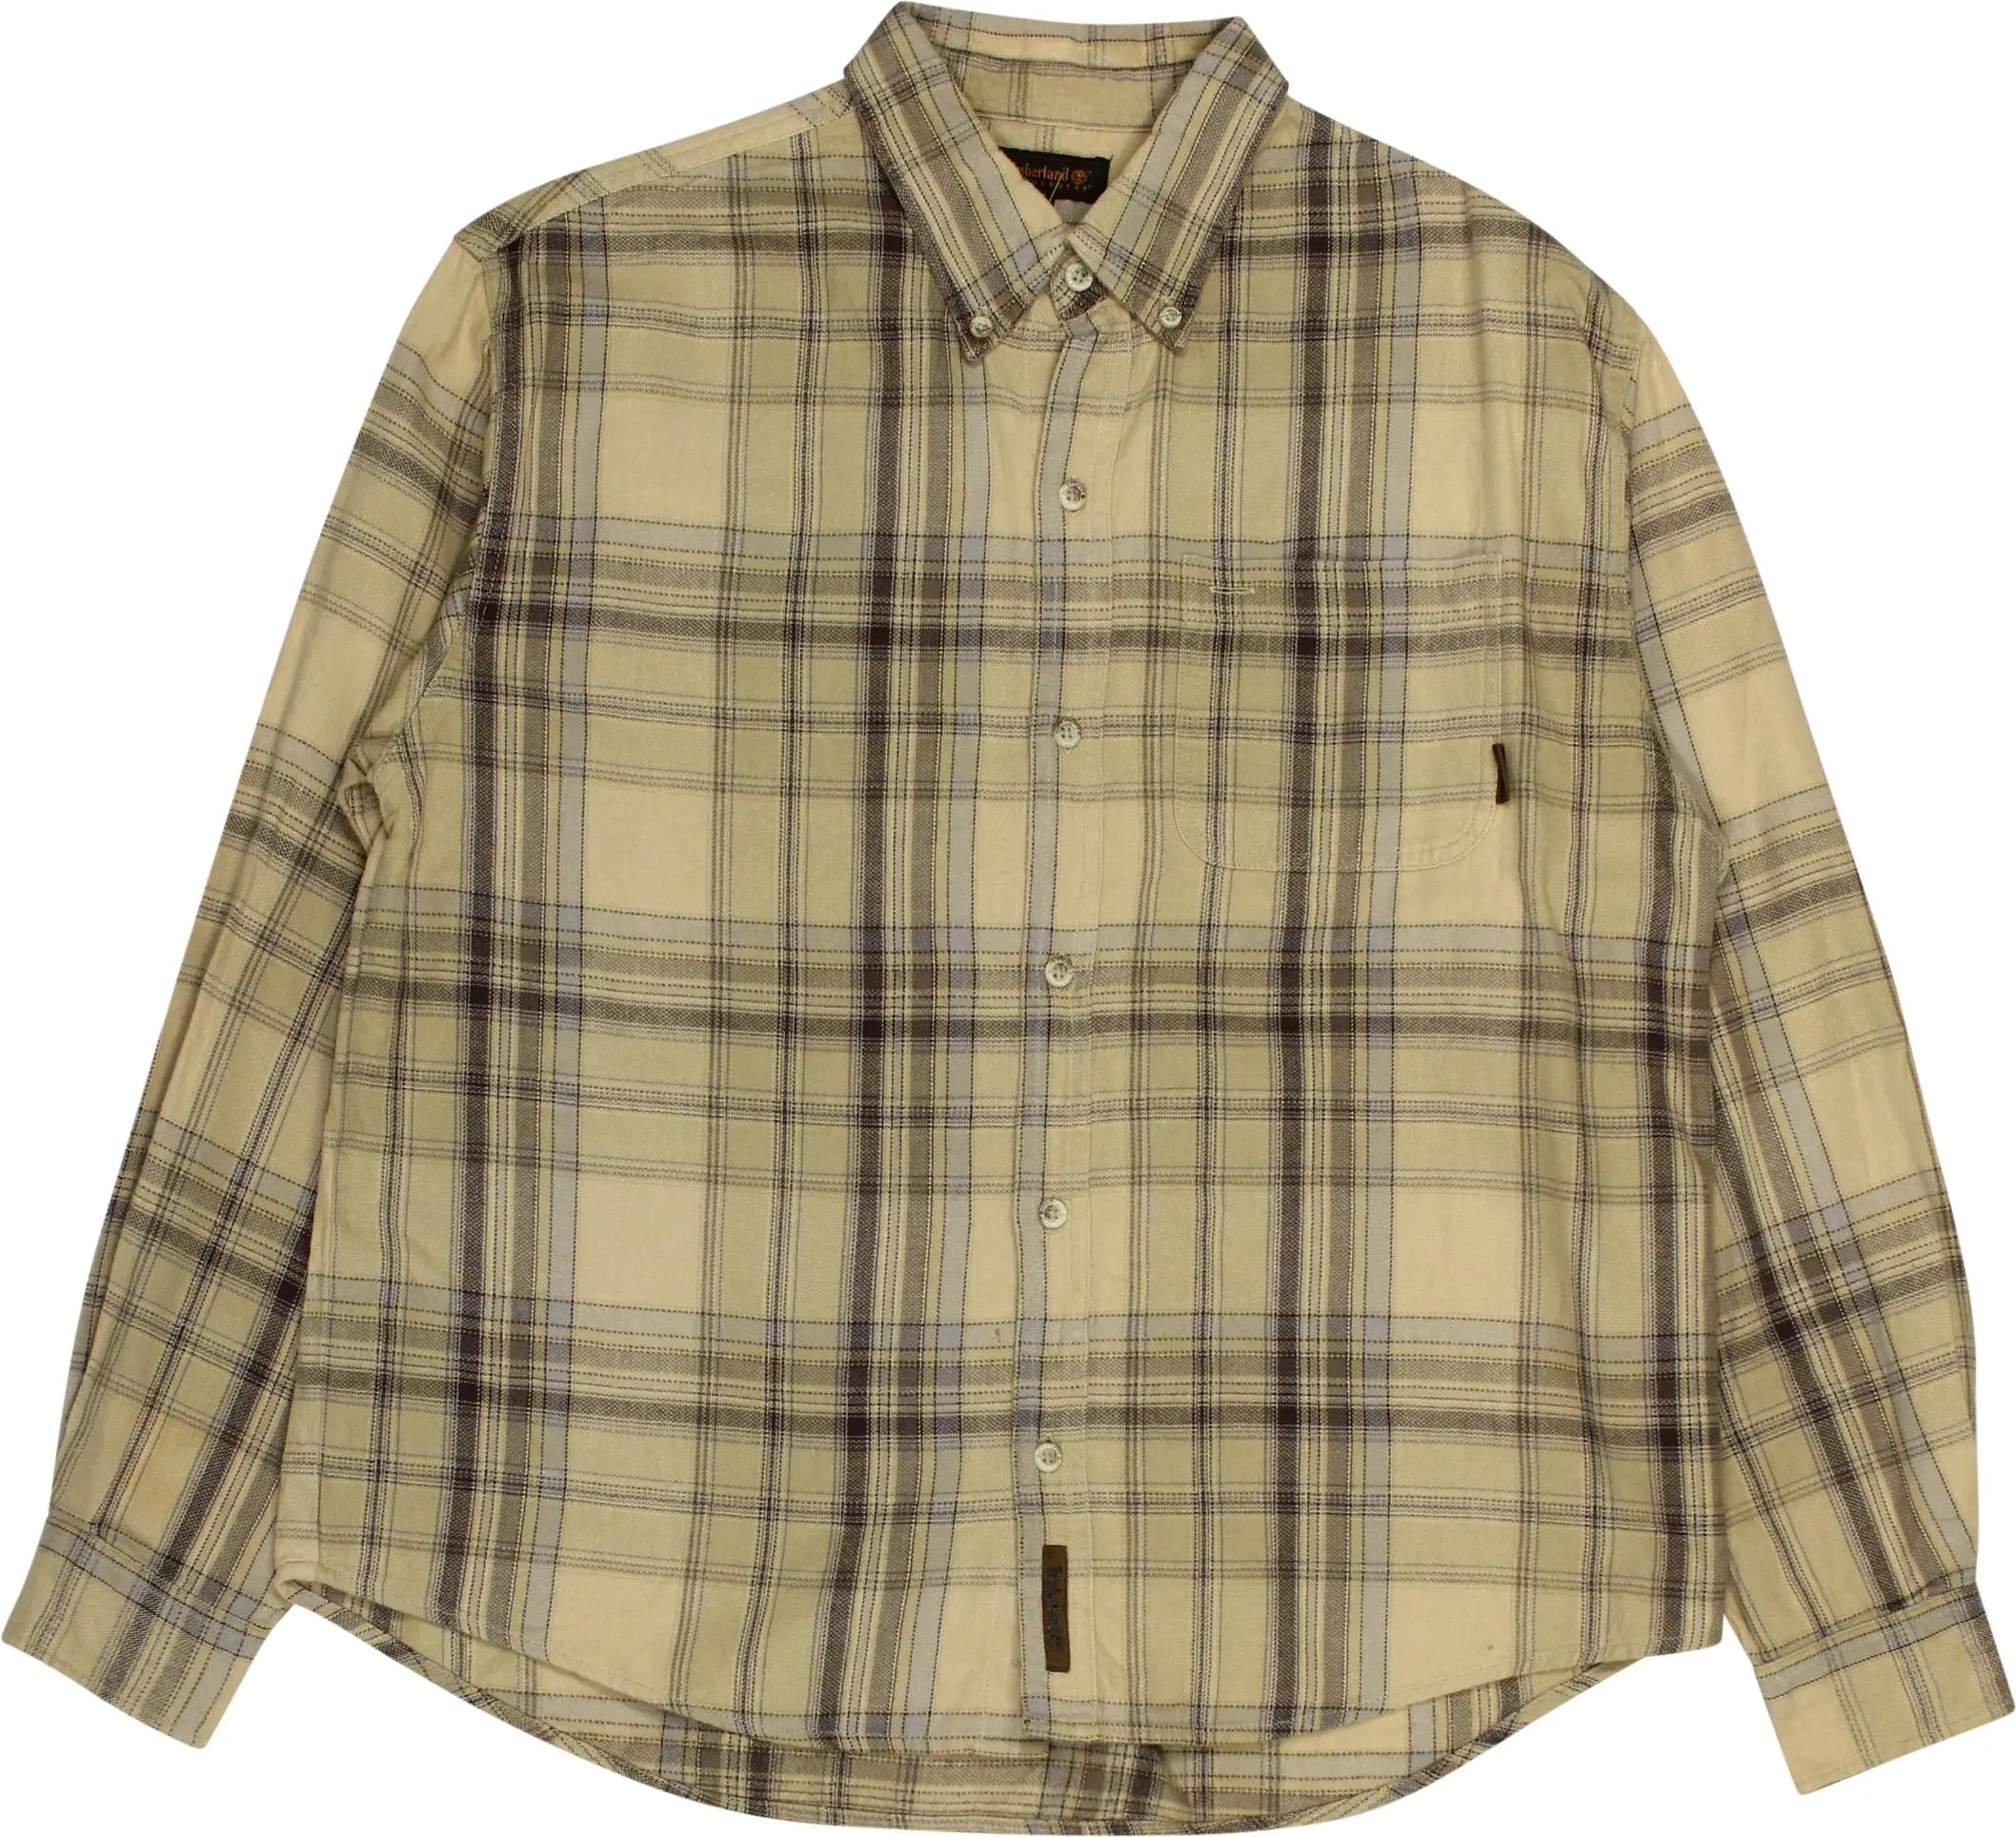 Timberland - Checkered shirt by Timberland- ThriftTale.com - Vintage and second handclothing